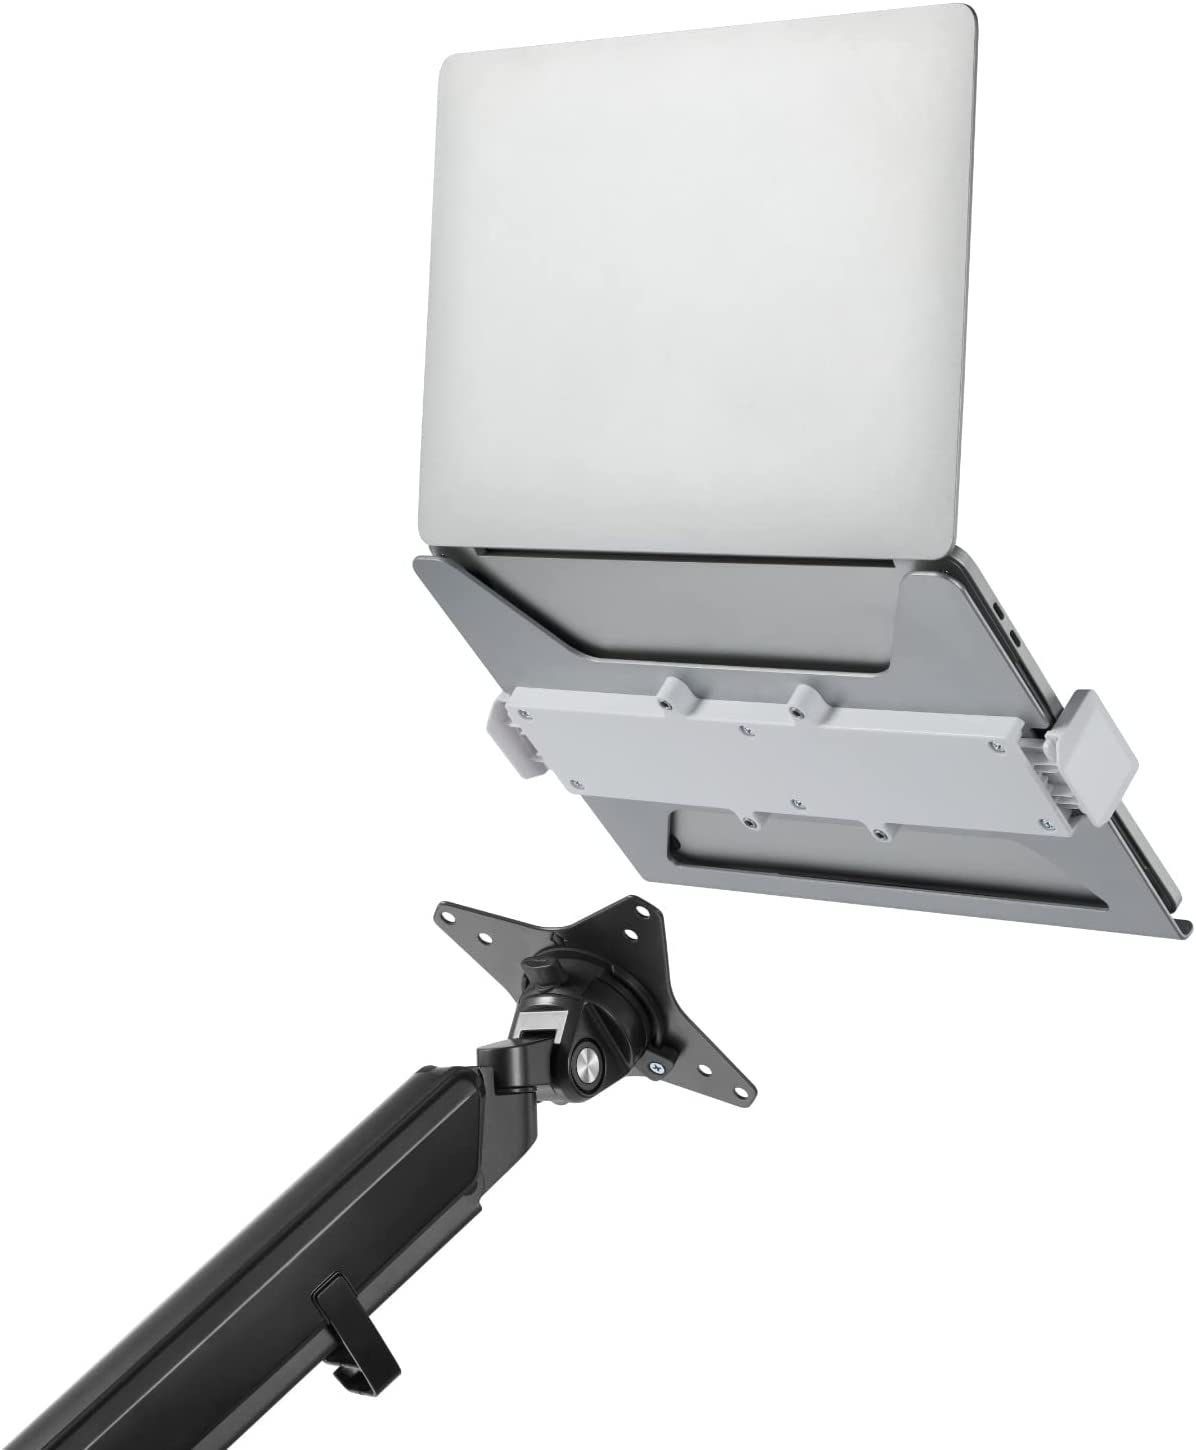 UNIVERSAL LAPTOP HOLDER ATTACHMENT FOR MONITOR ARMS